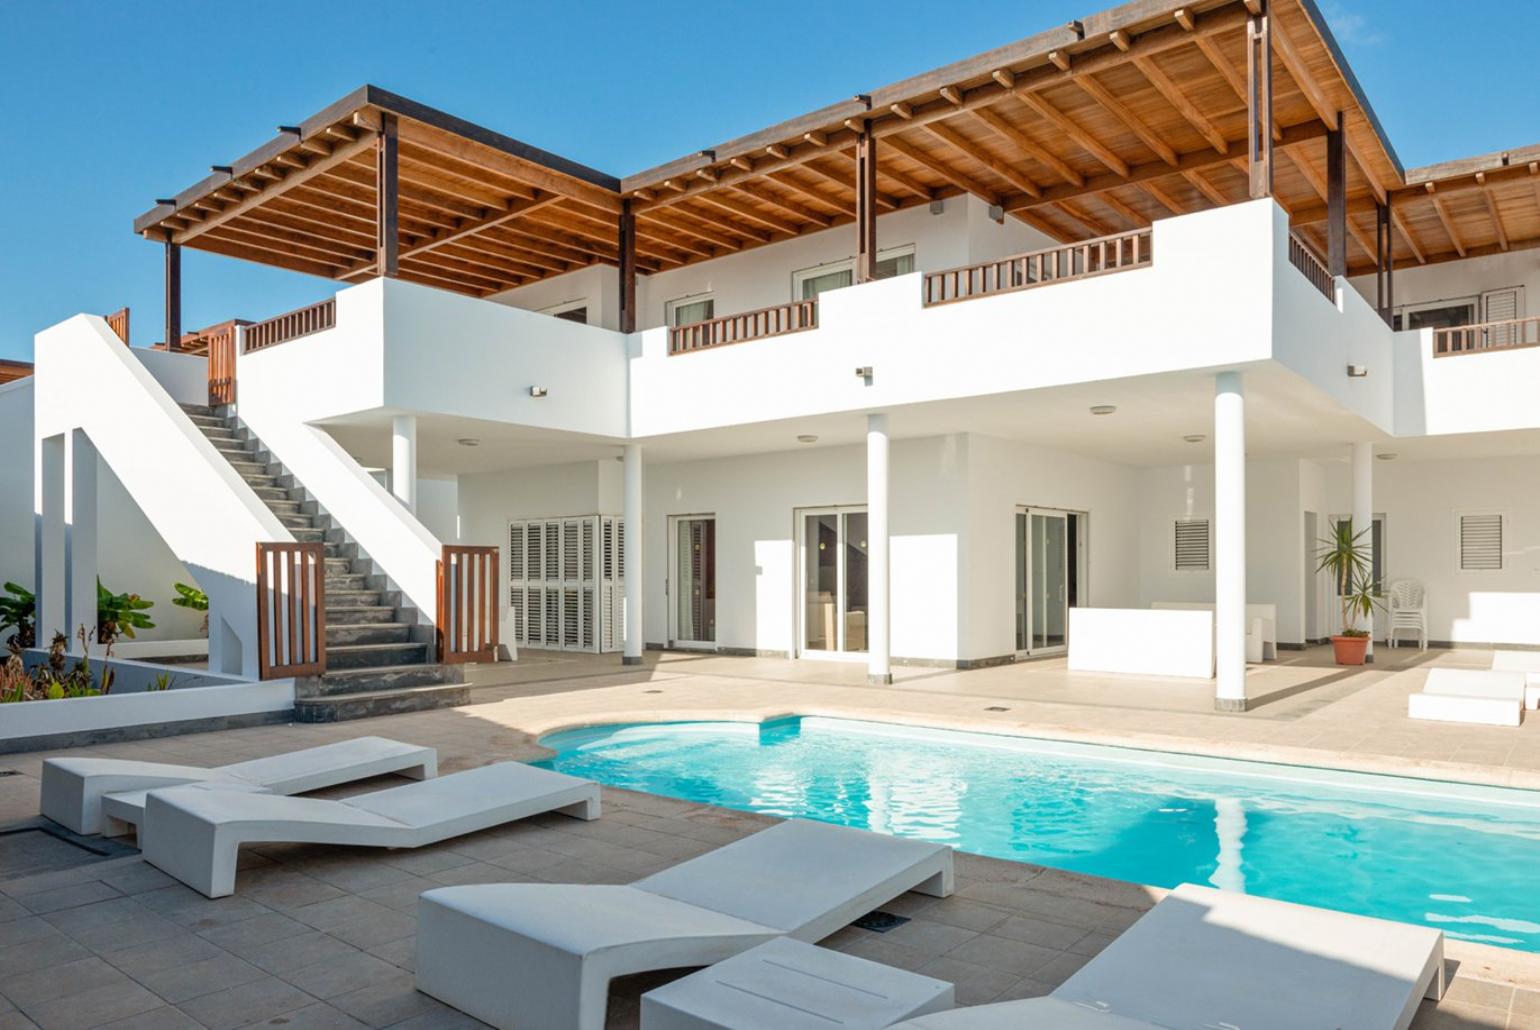 ,Beautiful villa with private pool,sunbeds, BBQ area ans sheltered patio